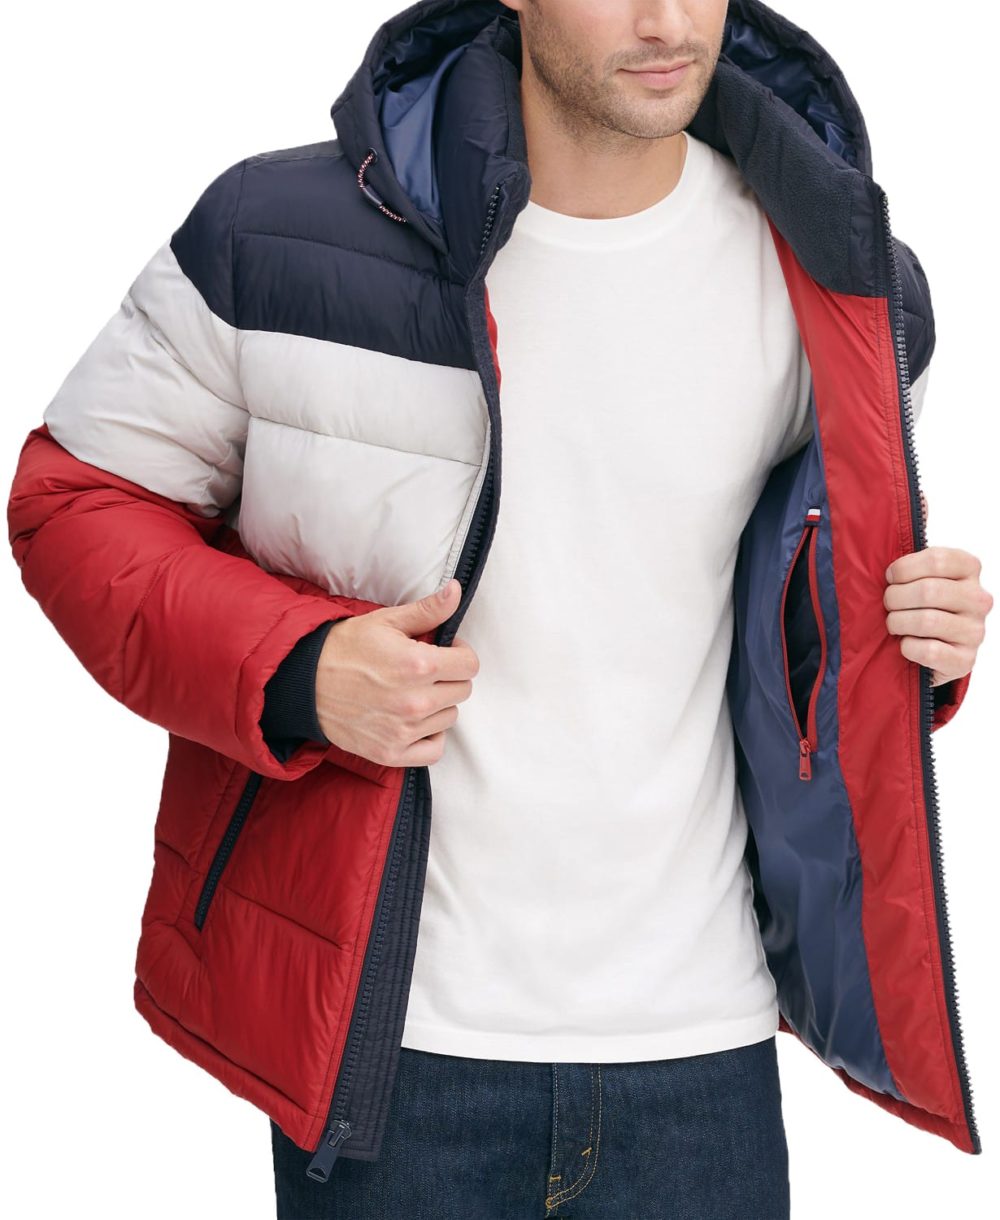 woocommerce-673321-2209615.cloudwaysapps.com-tommy-hilfiger-mens-midnight-buff-quilted-puffer-jacket